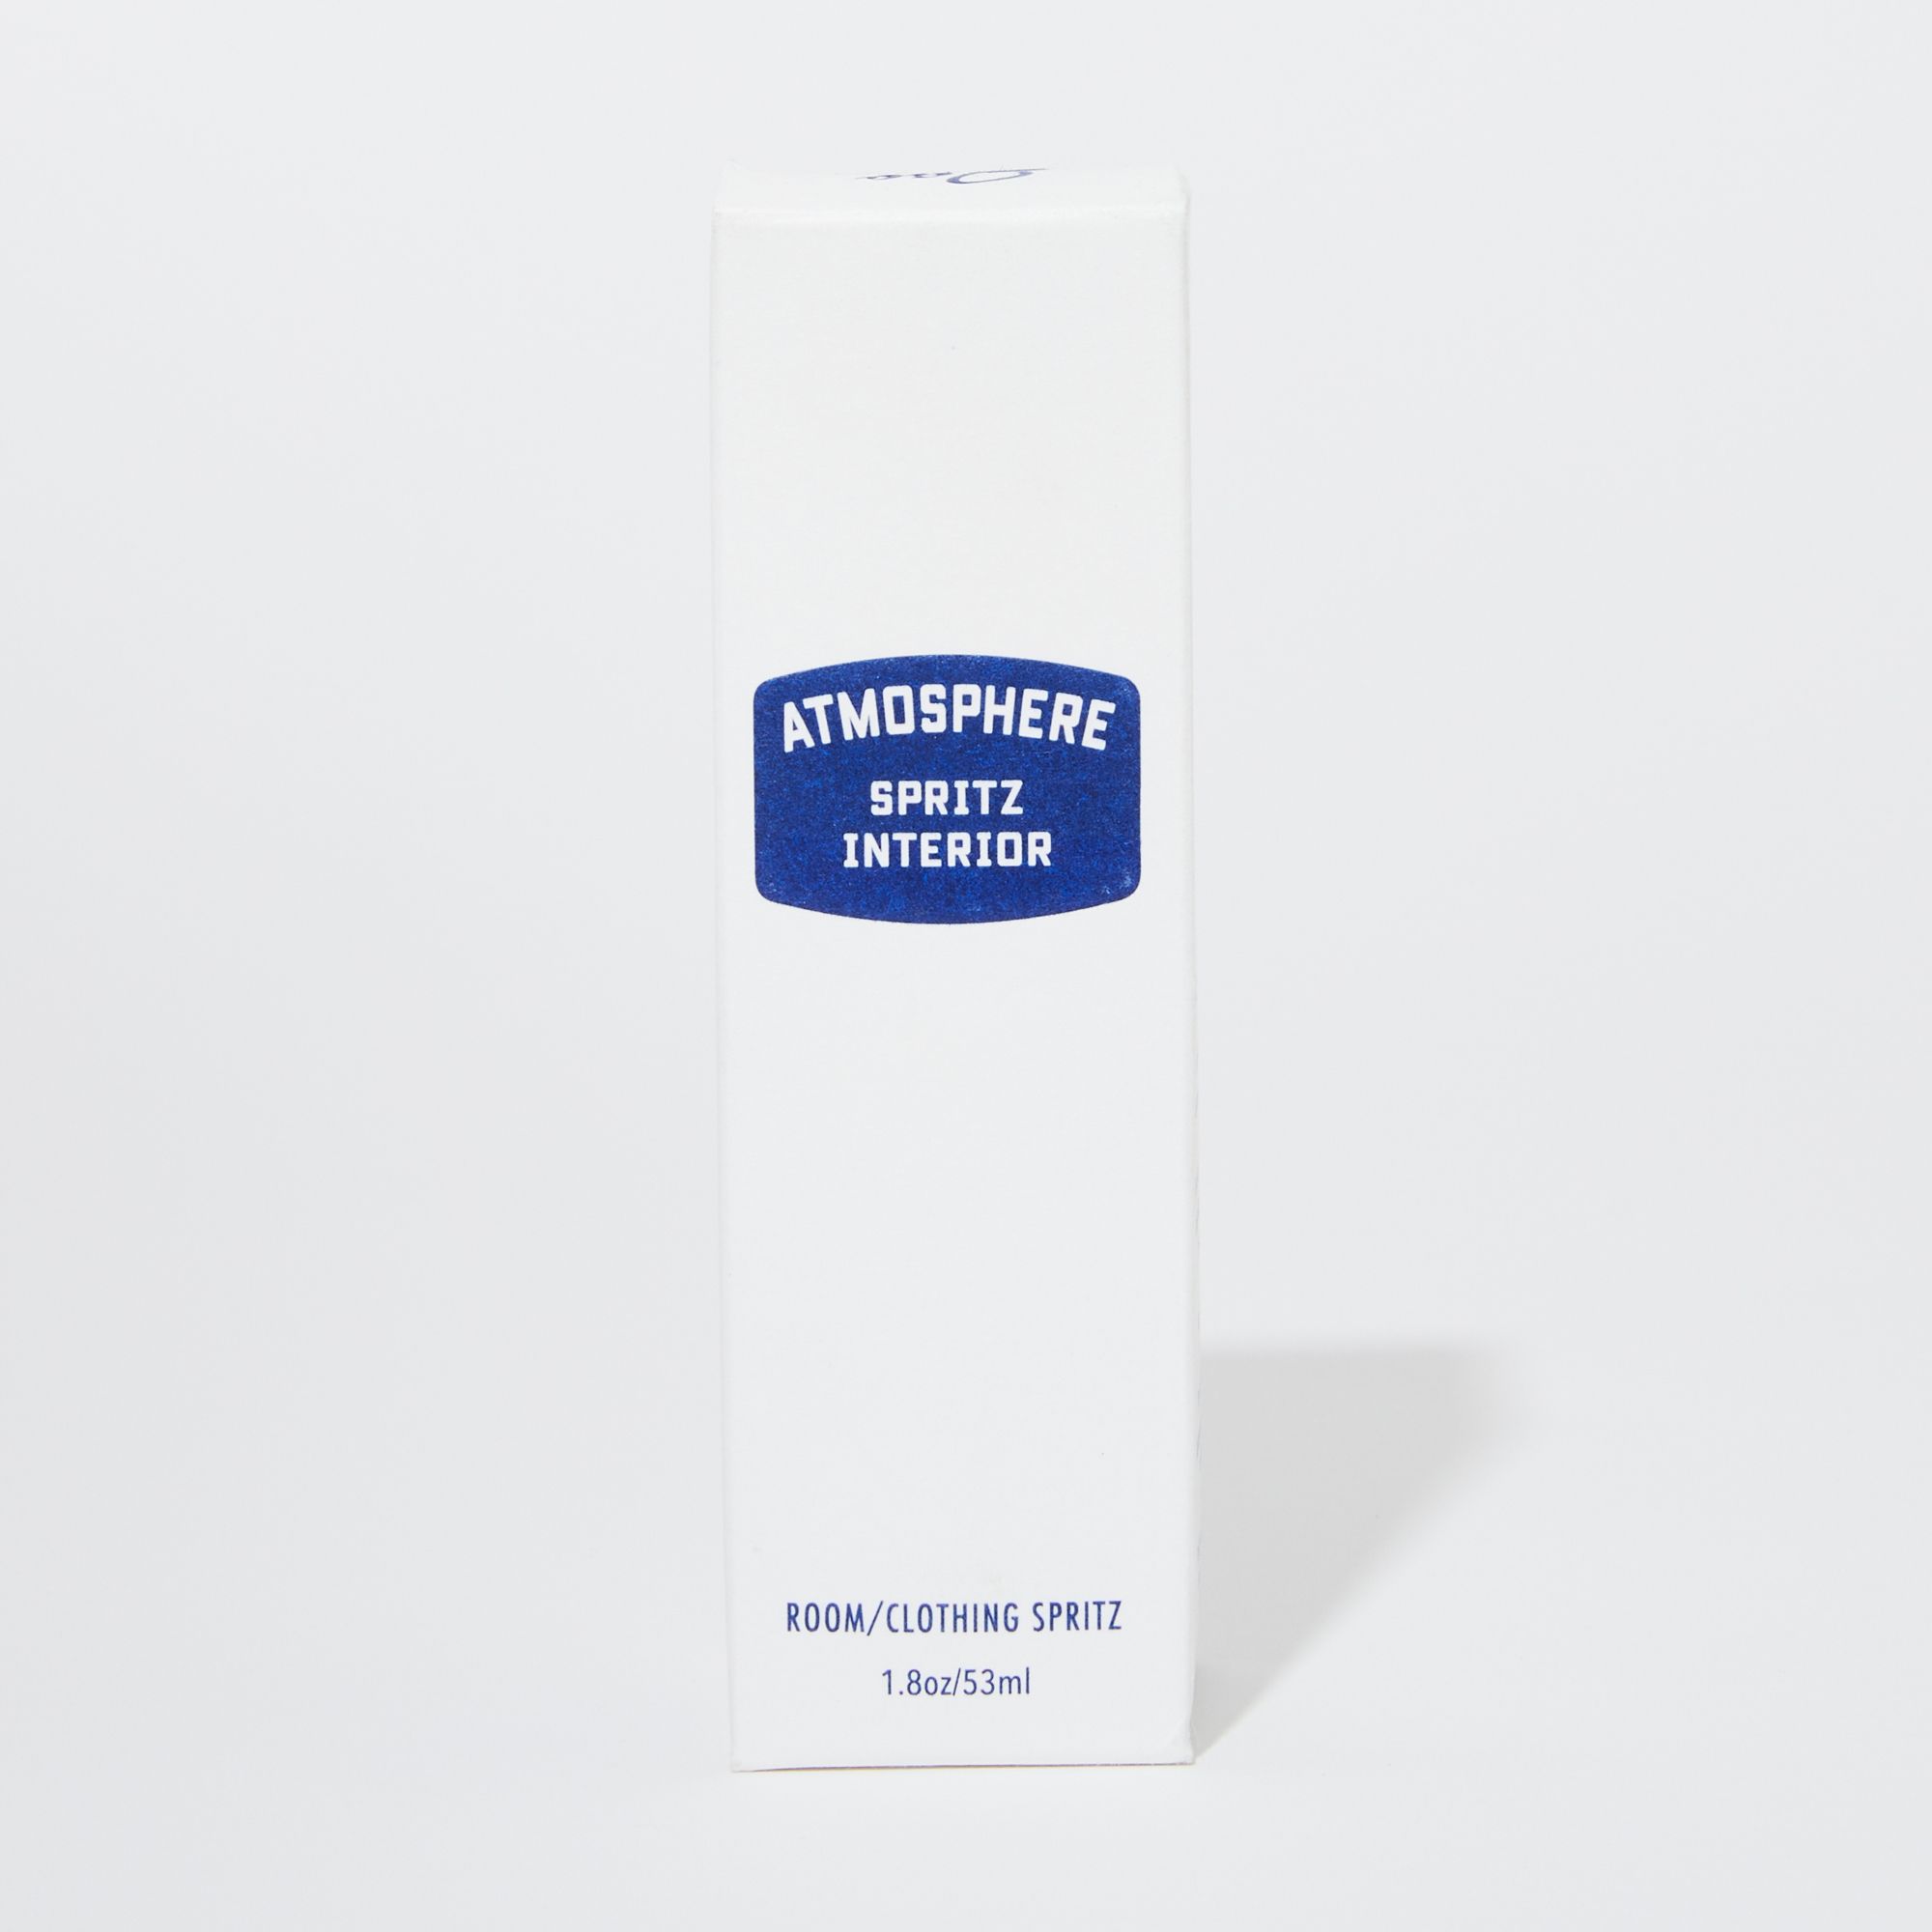 White box with a blue label that reads "Atmosphere Spritz Interior" "Room/clothing spray"